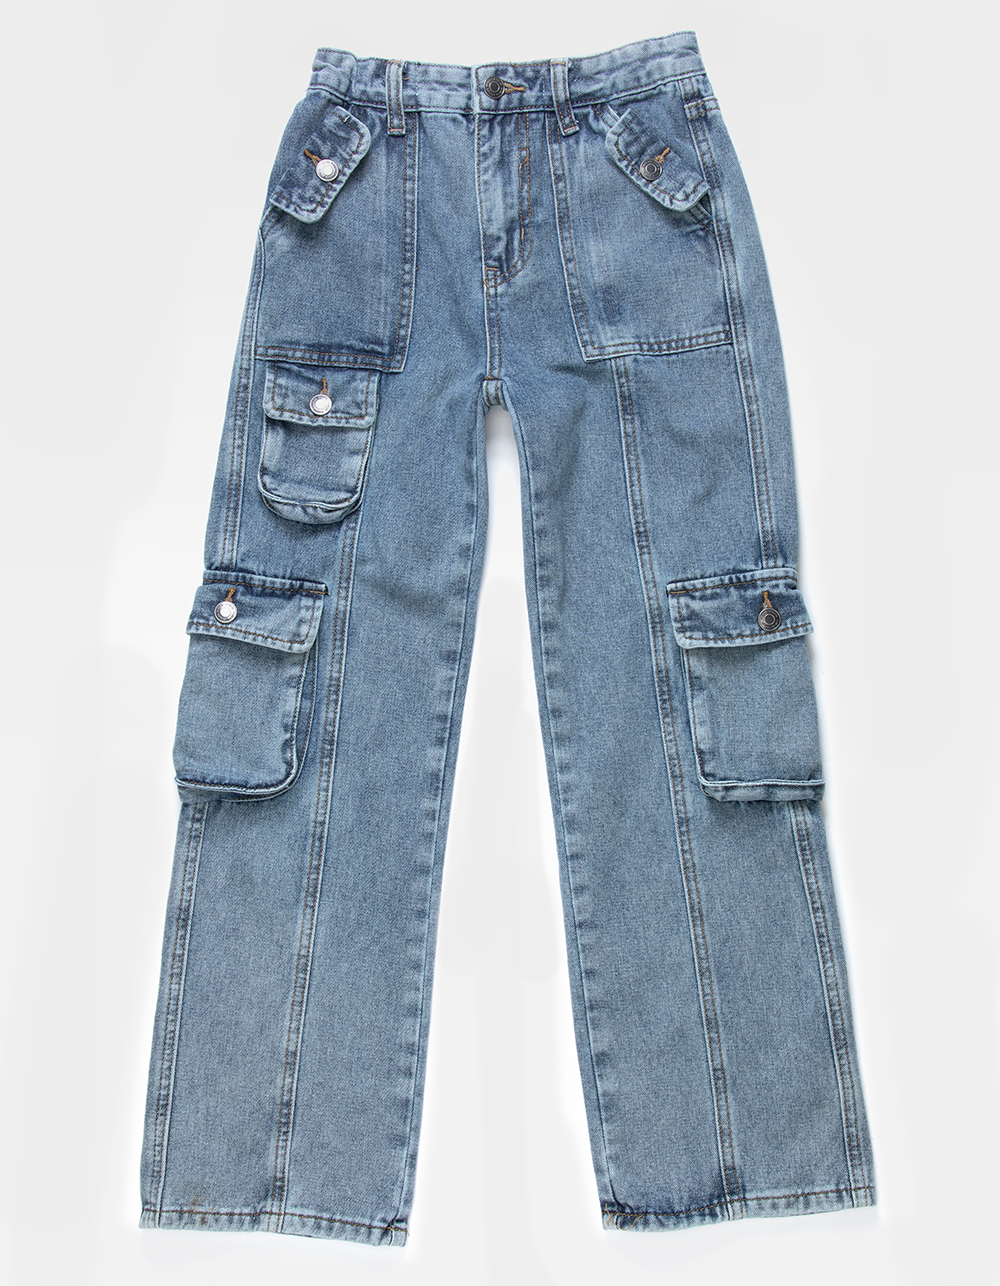 RSQ Girls Low Rise Flare Jeans